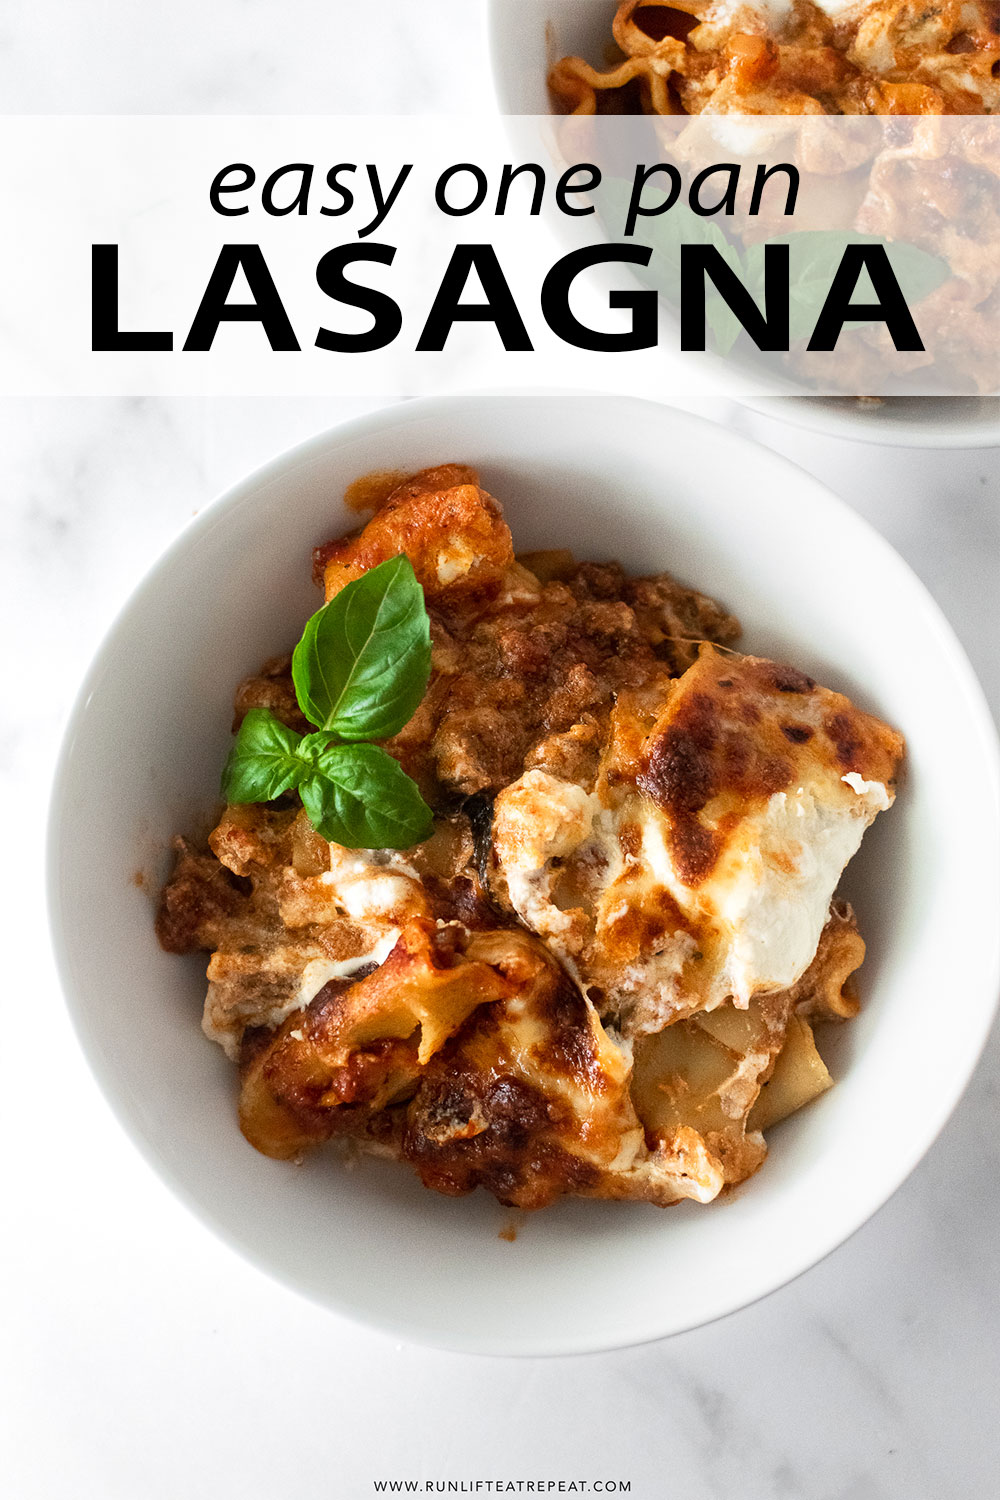 One skillet is all you need to make this insanely flavorful lasagna recipe. The process is extremely easy: add the ground beef with a mixture of Italian spices and brown in a skillet. Then, toss in the remaining ingredients and finish with ricotta and shredded mozzarella cheese. This is a quick family favorite 35-minute dinner recipe that you'll want to make all year long!